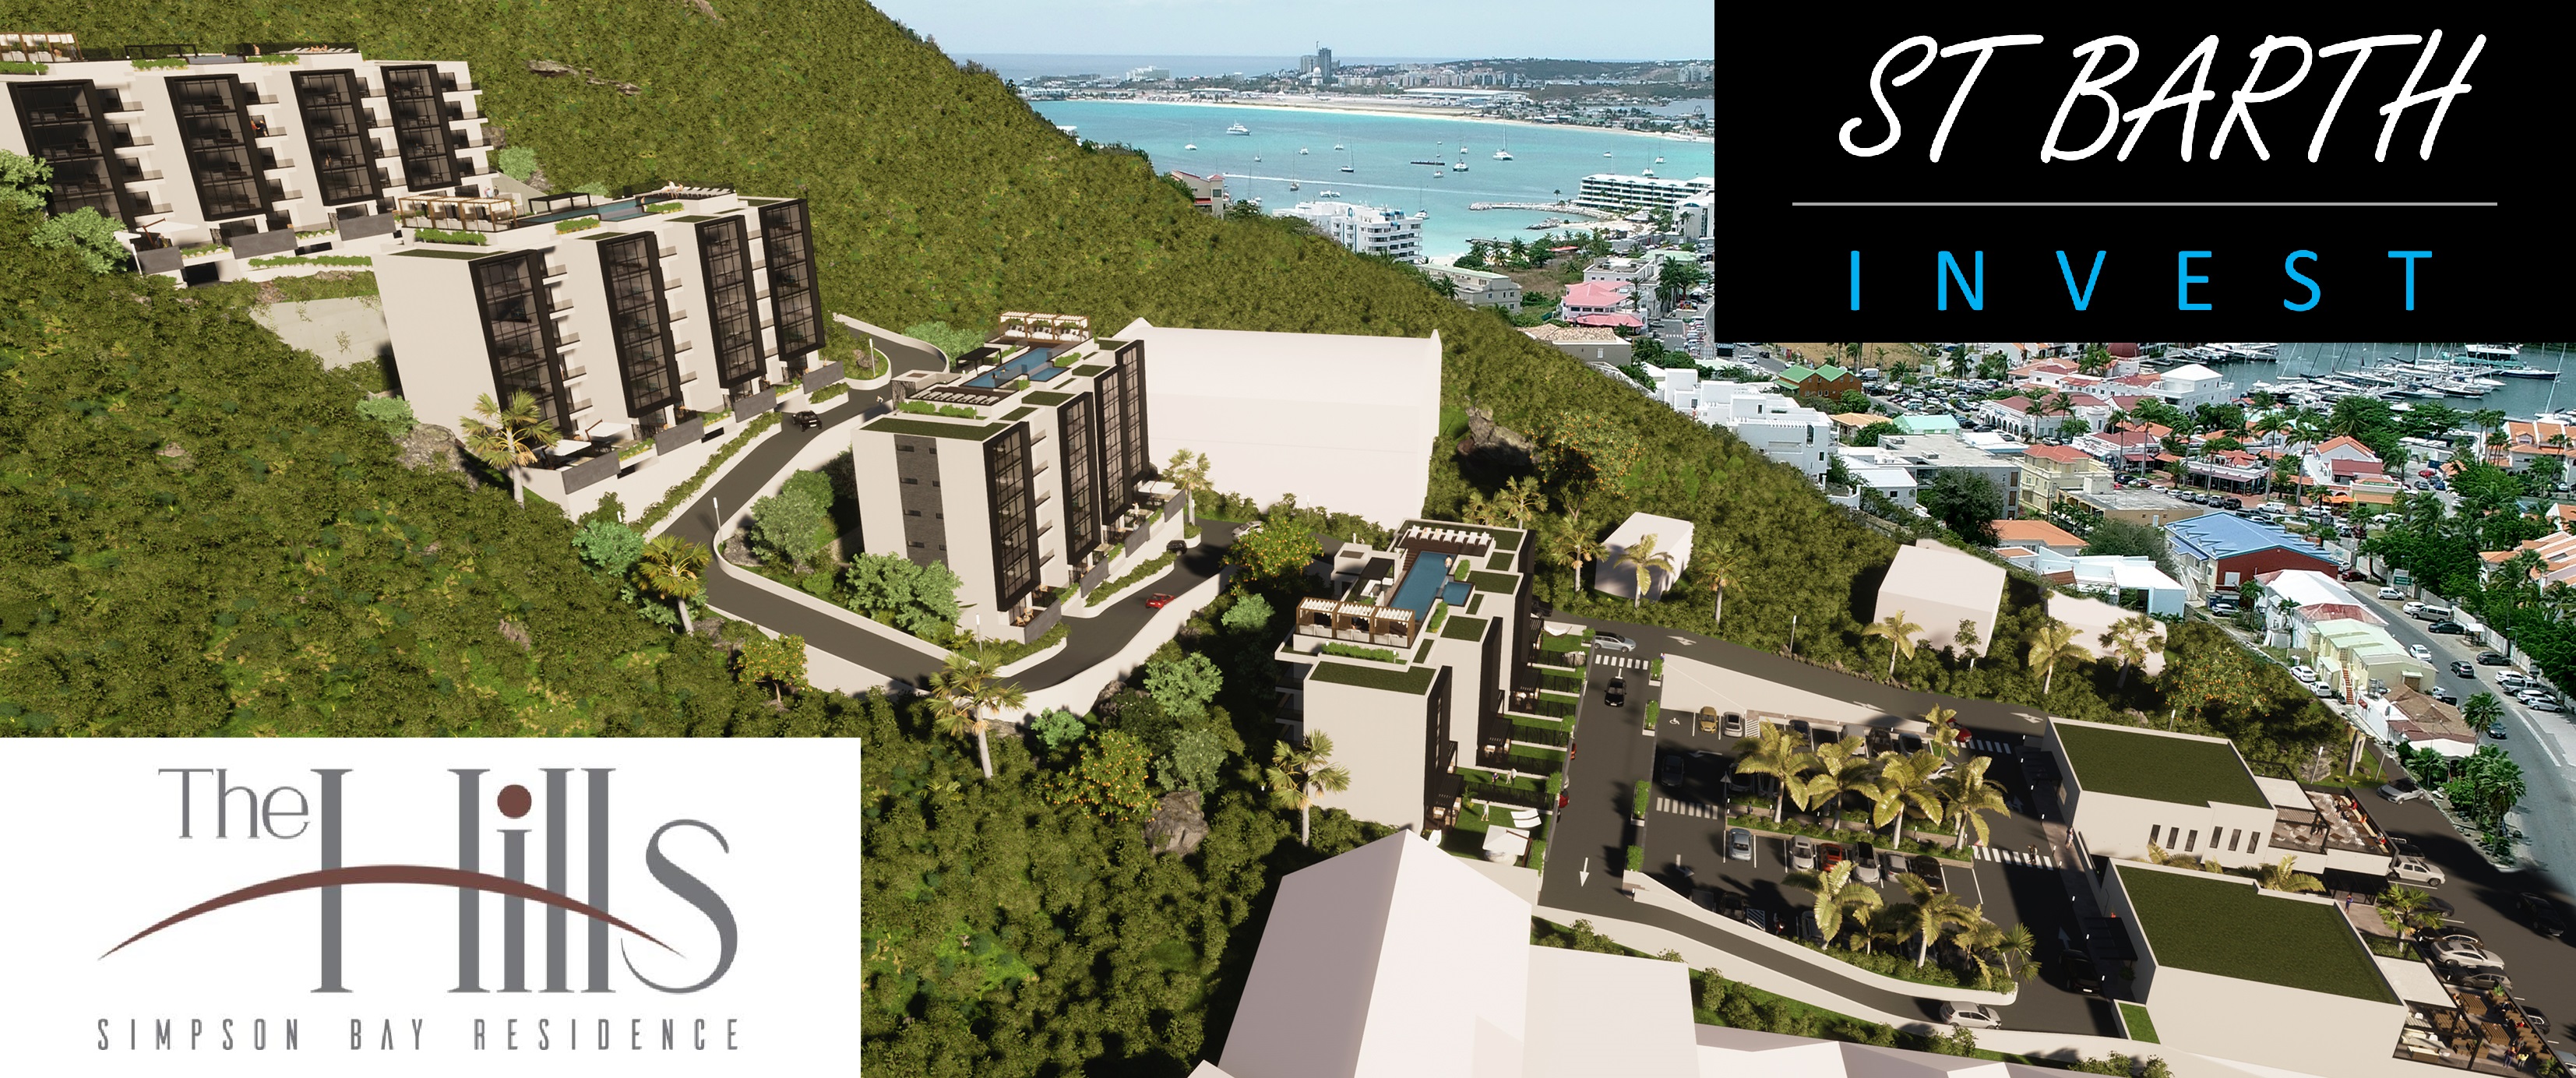 St Barth Invest THE HILLS - Simpson Bay - Appartements & commerces Saint-Martin